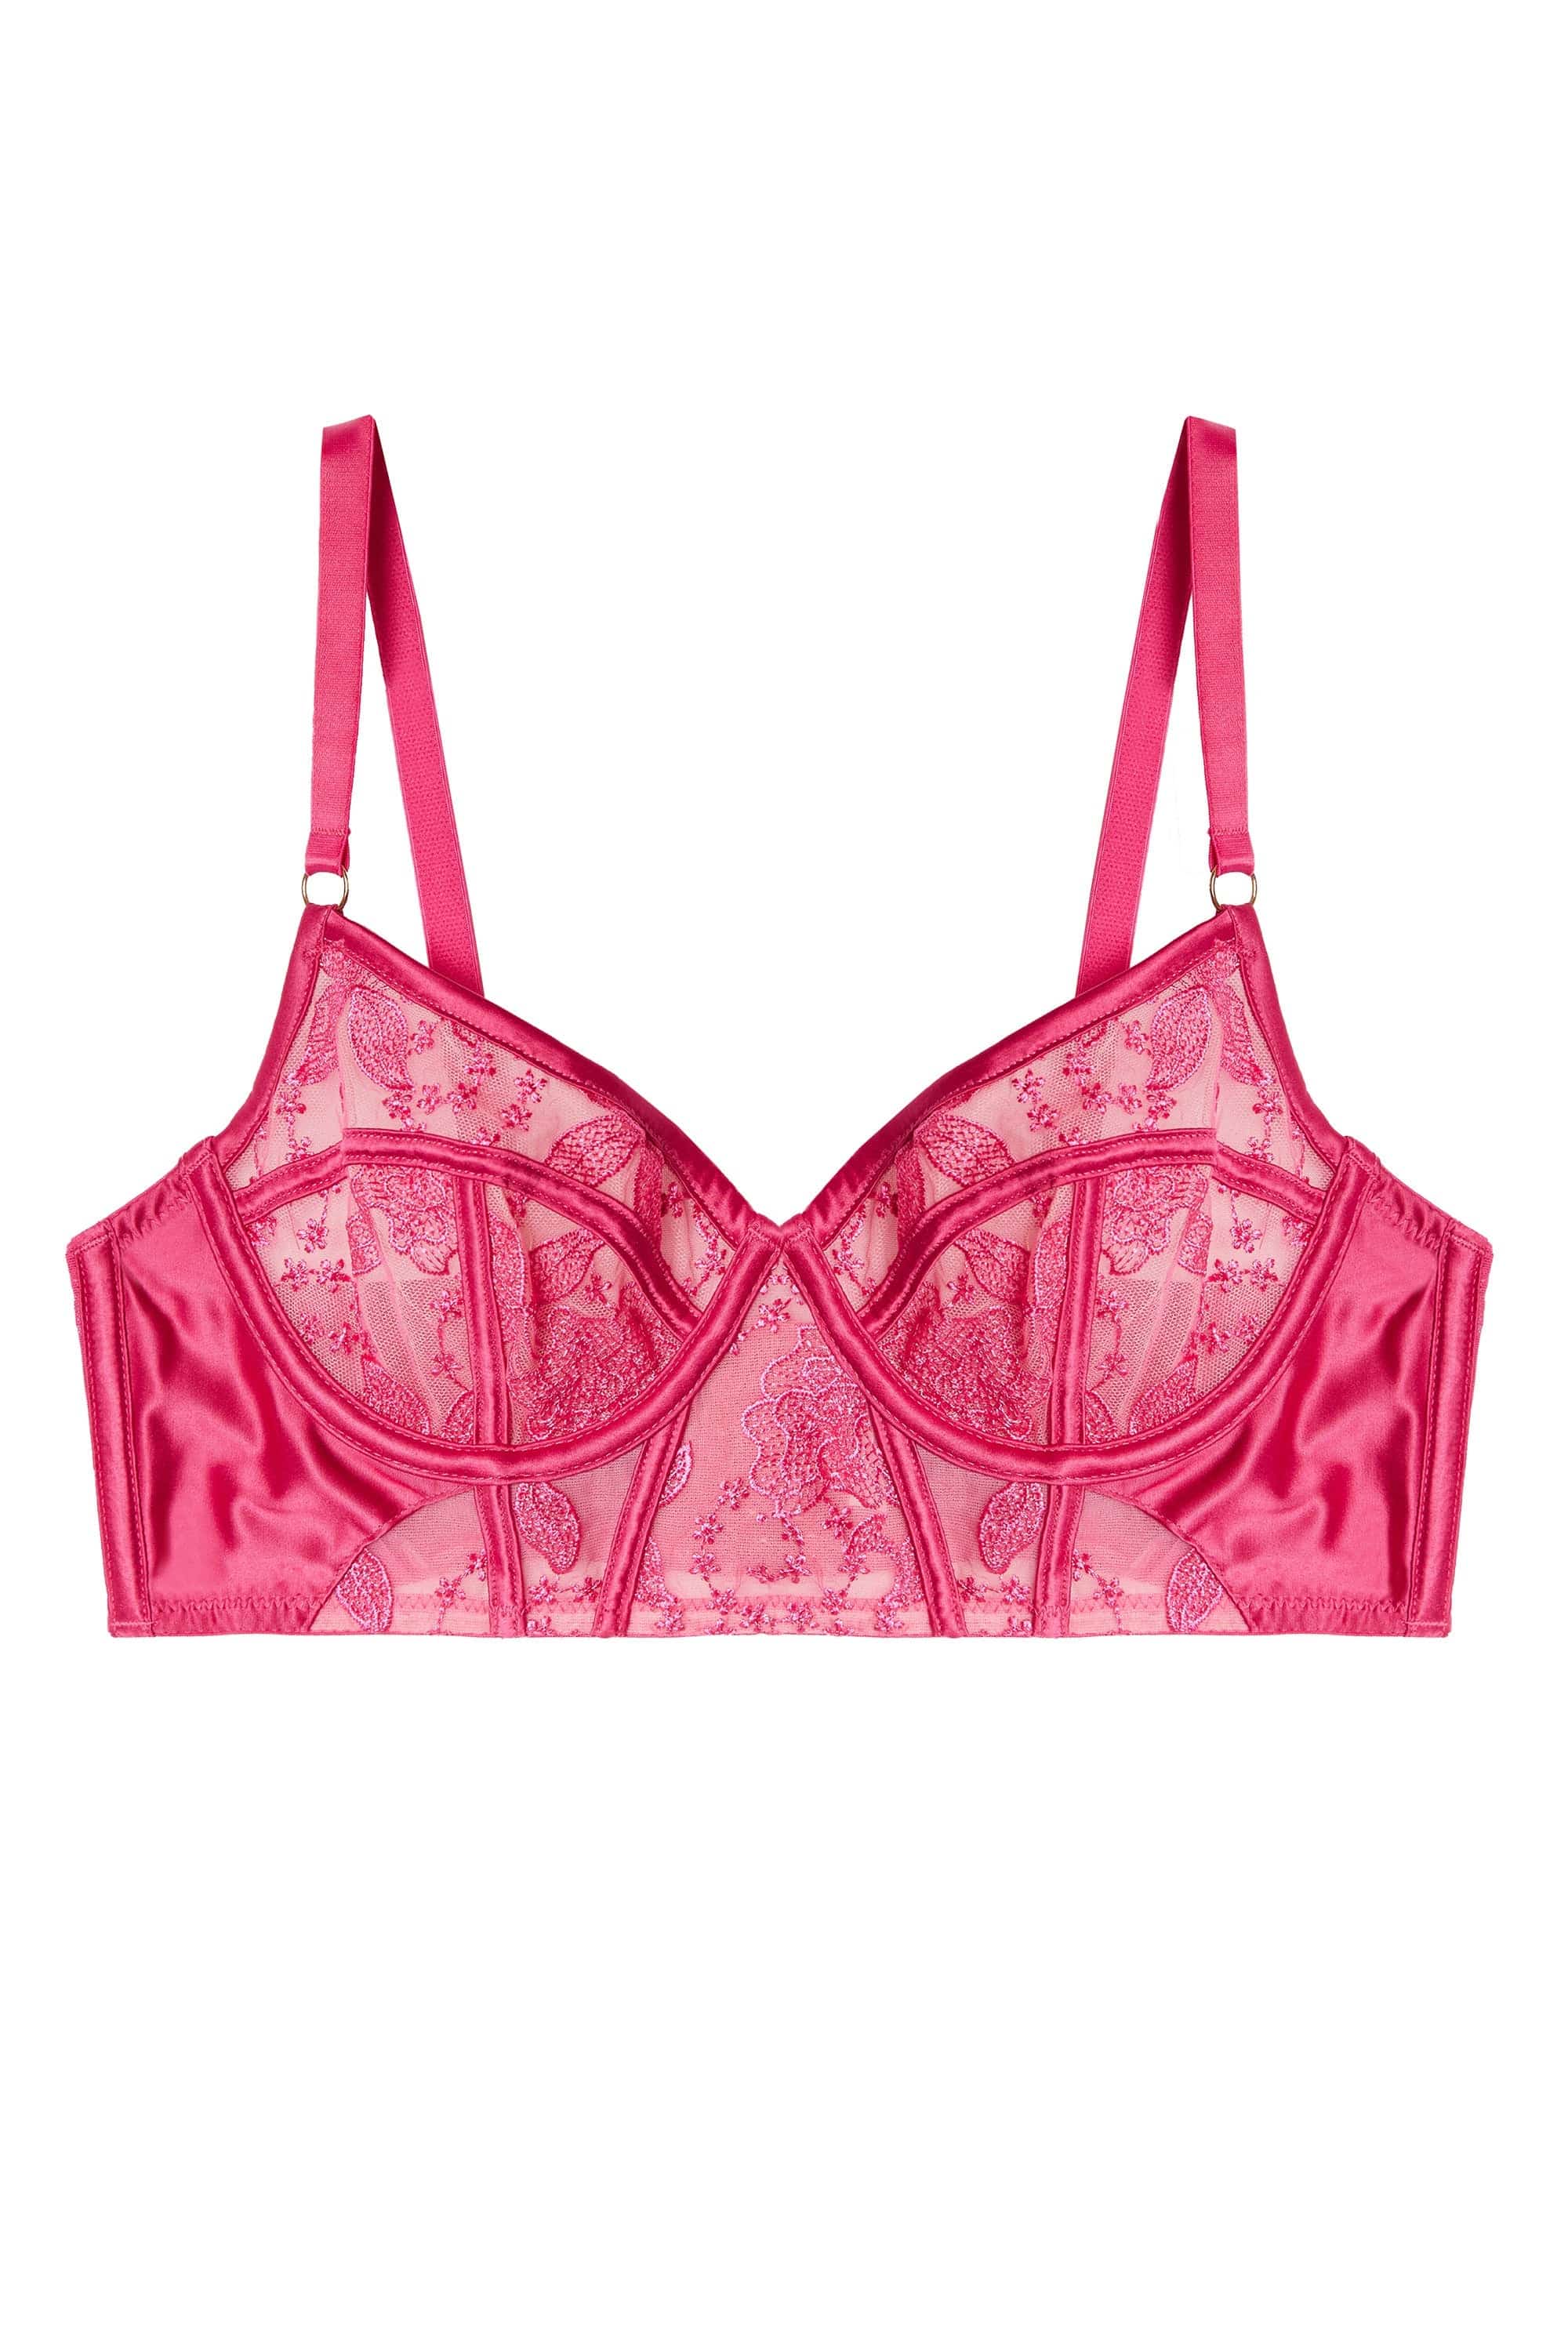 Lipsy pink embroidered bralette